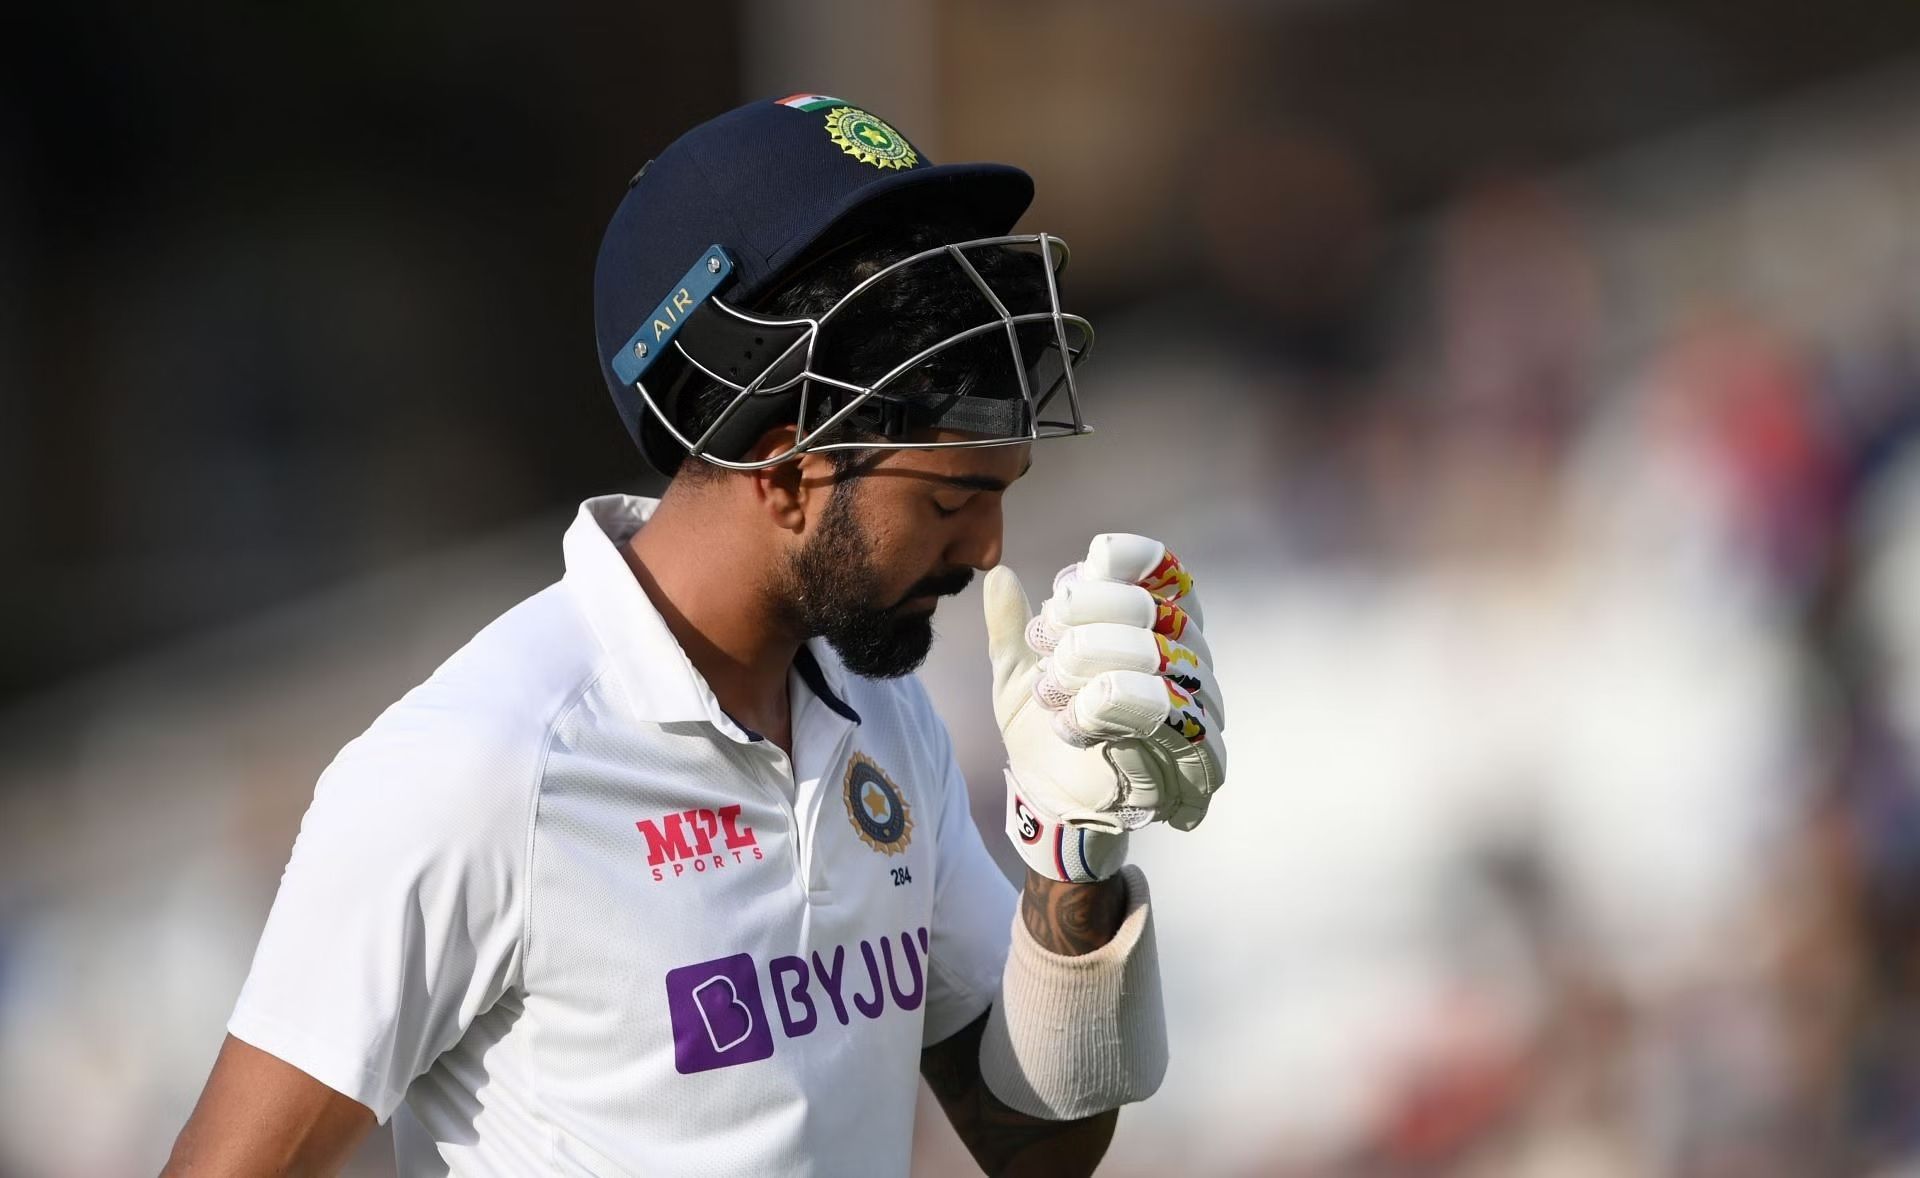 KL Rahul was in survival mode on Day 1 of the Mirpur Test.